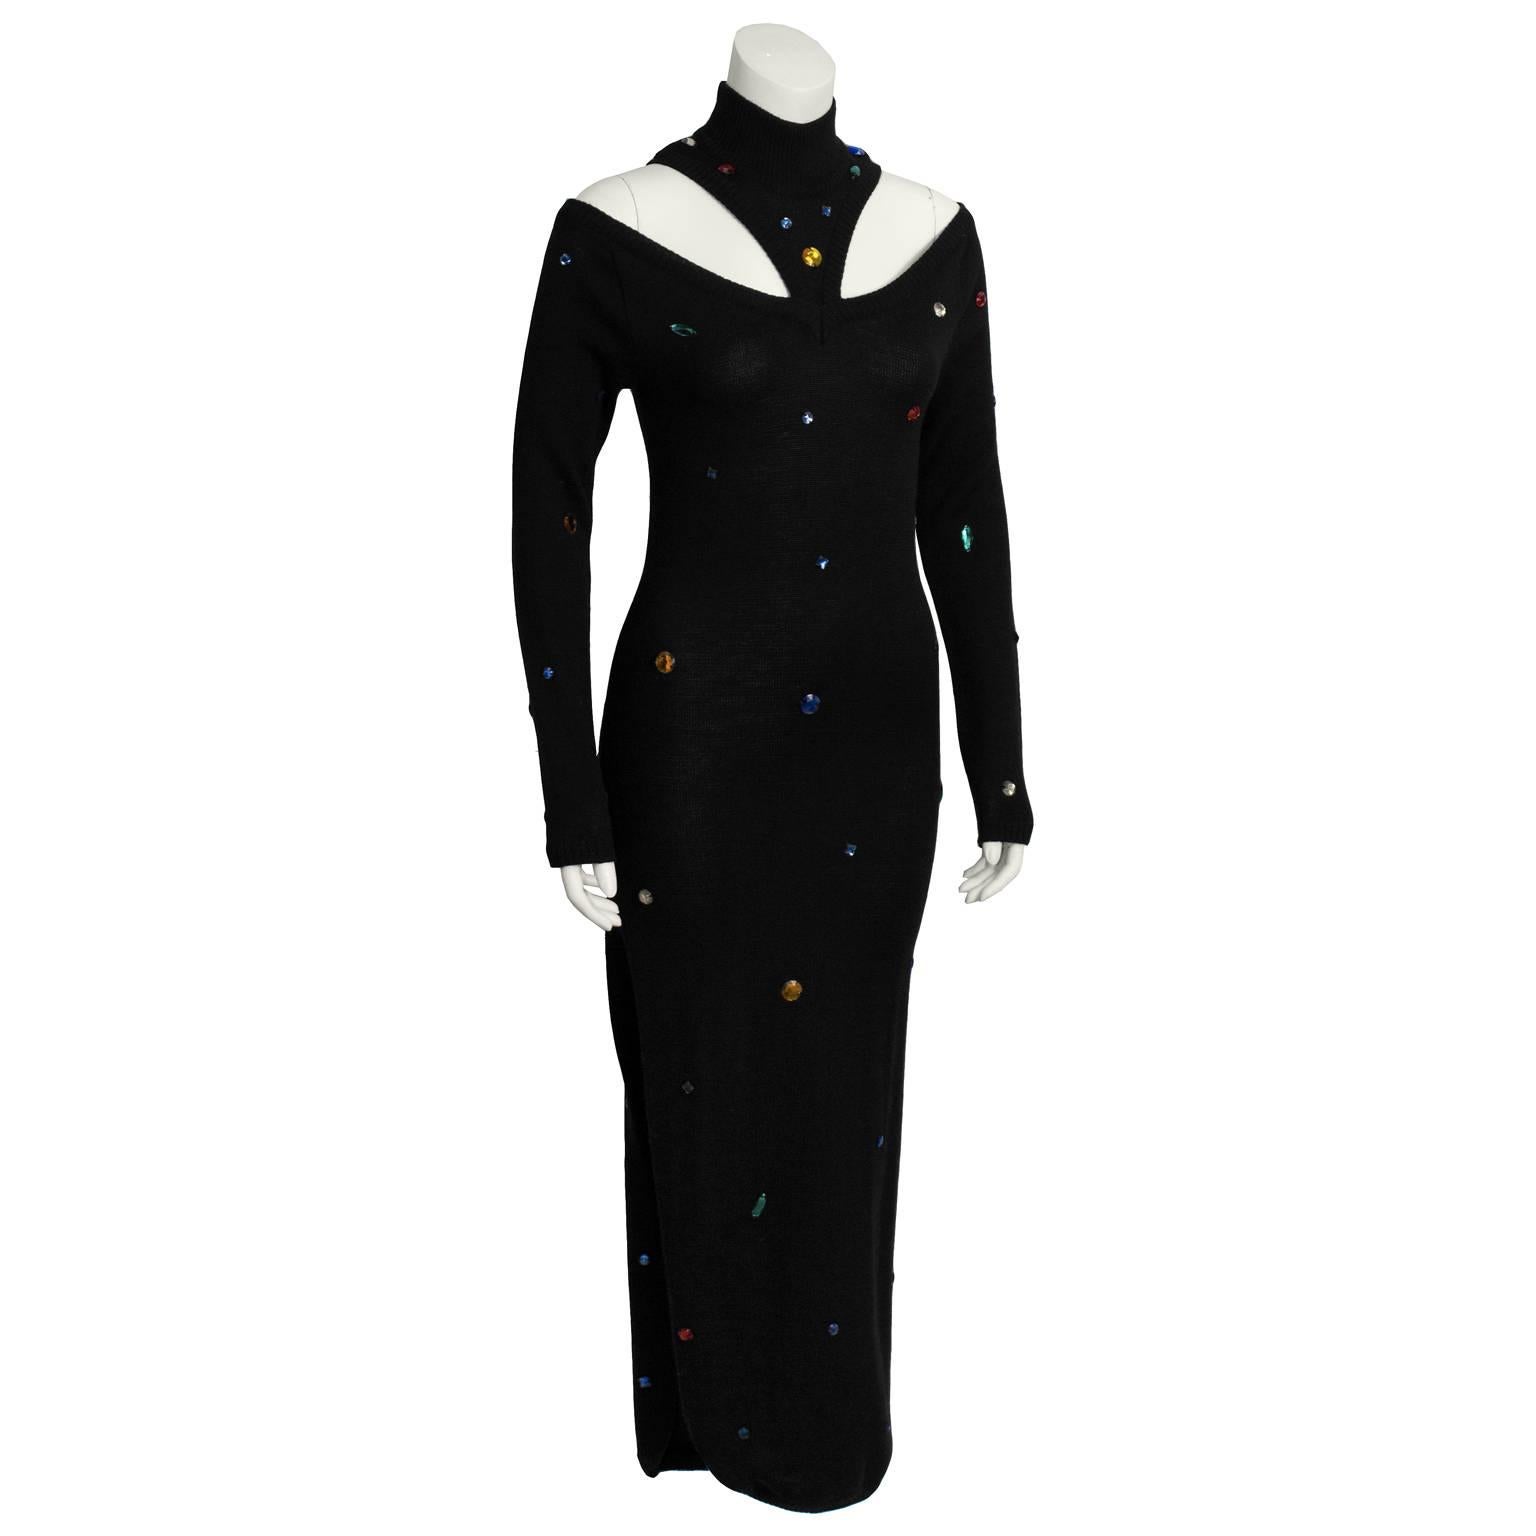 A fabulous black knit maxi dress by French designer Chantal Thomass from the 1980's. Disco fabulous black dress features a mock neck, with sexy cutout shoulders and long sleeves. Multi-colored jewels placed throughout the dress add a rock and roll